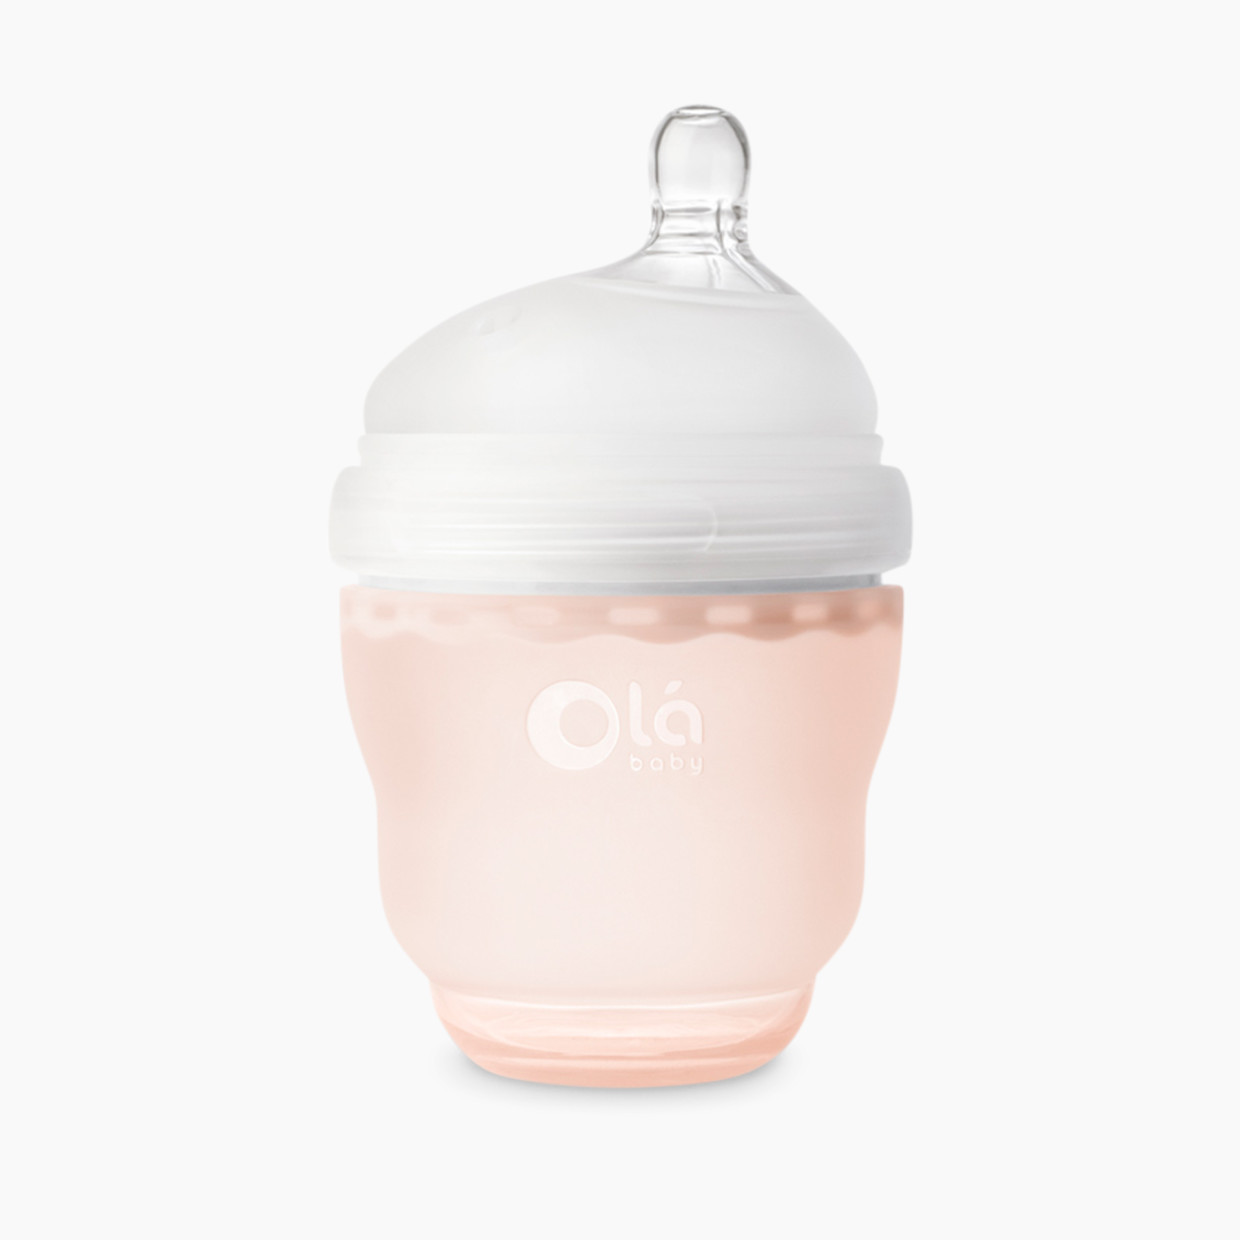 Olababy Gentle Baby Bottle - Coral, 4 Oz, 1.